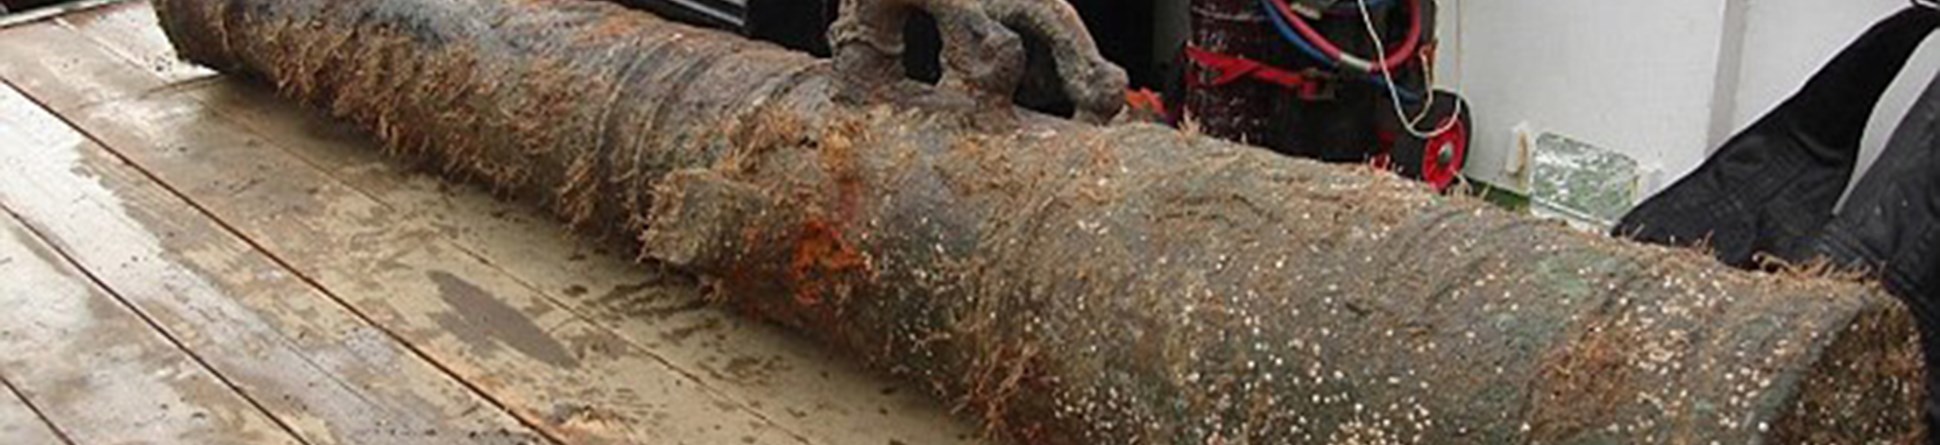 Image of a bronze cannon recovered from a historic wreck.